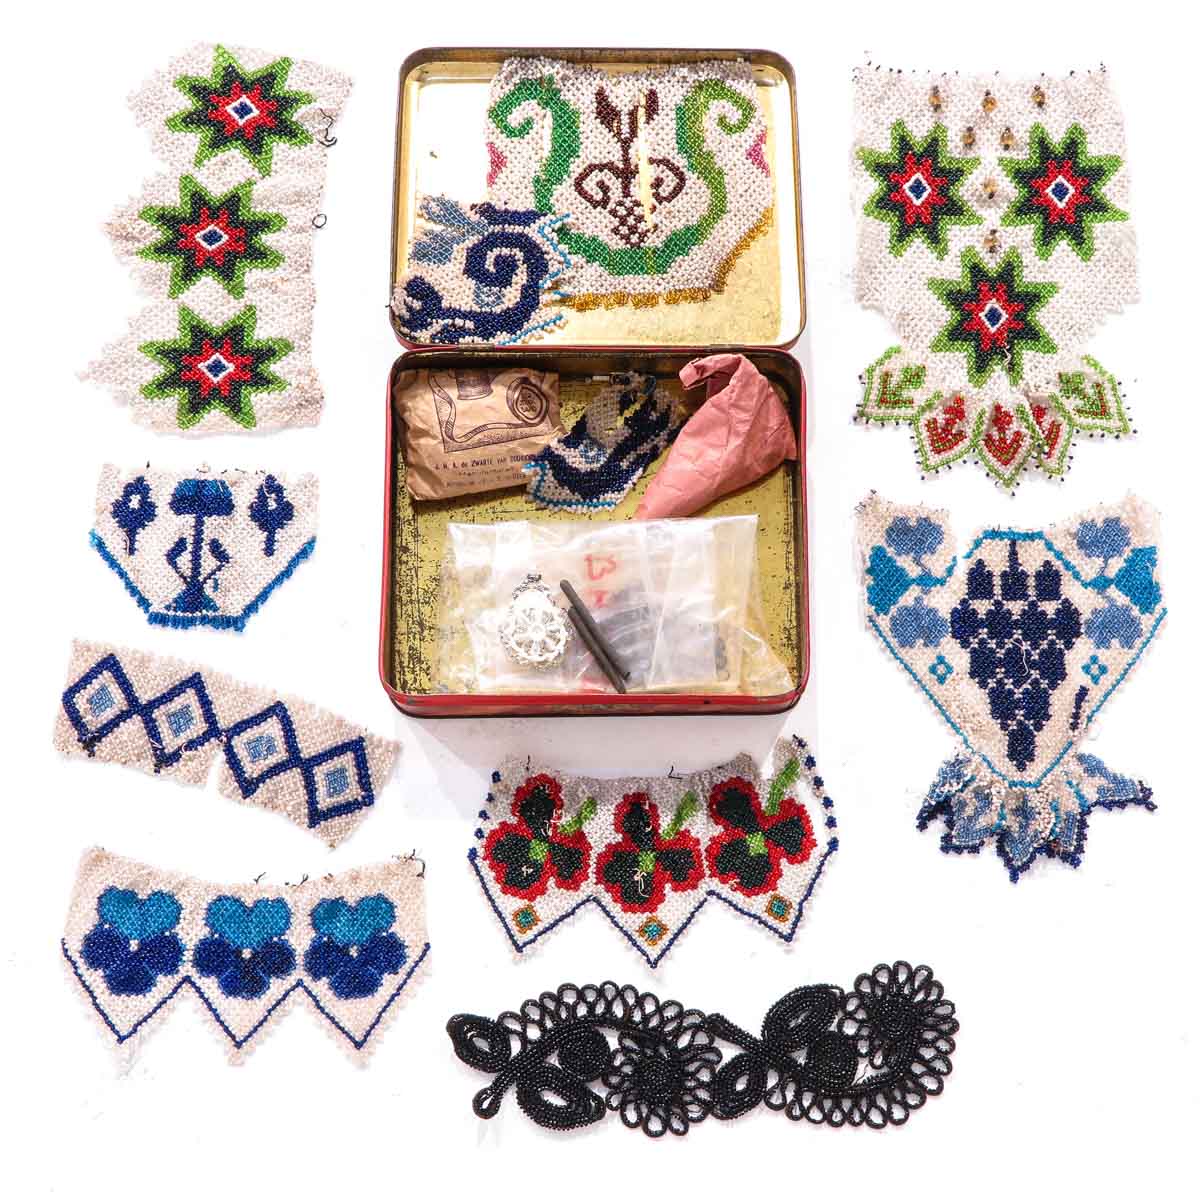 A Collection of Men and Womens Clothing and Jewerly from Traditional Dutch Dress - Image 5 of 10